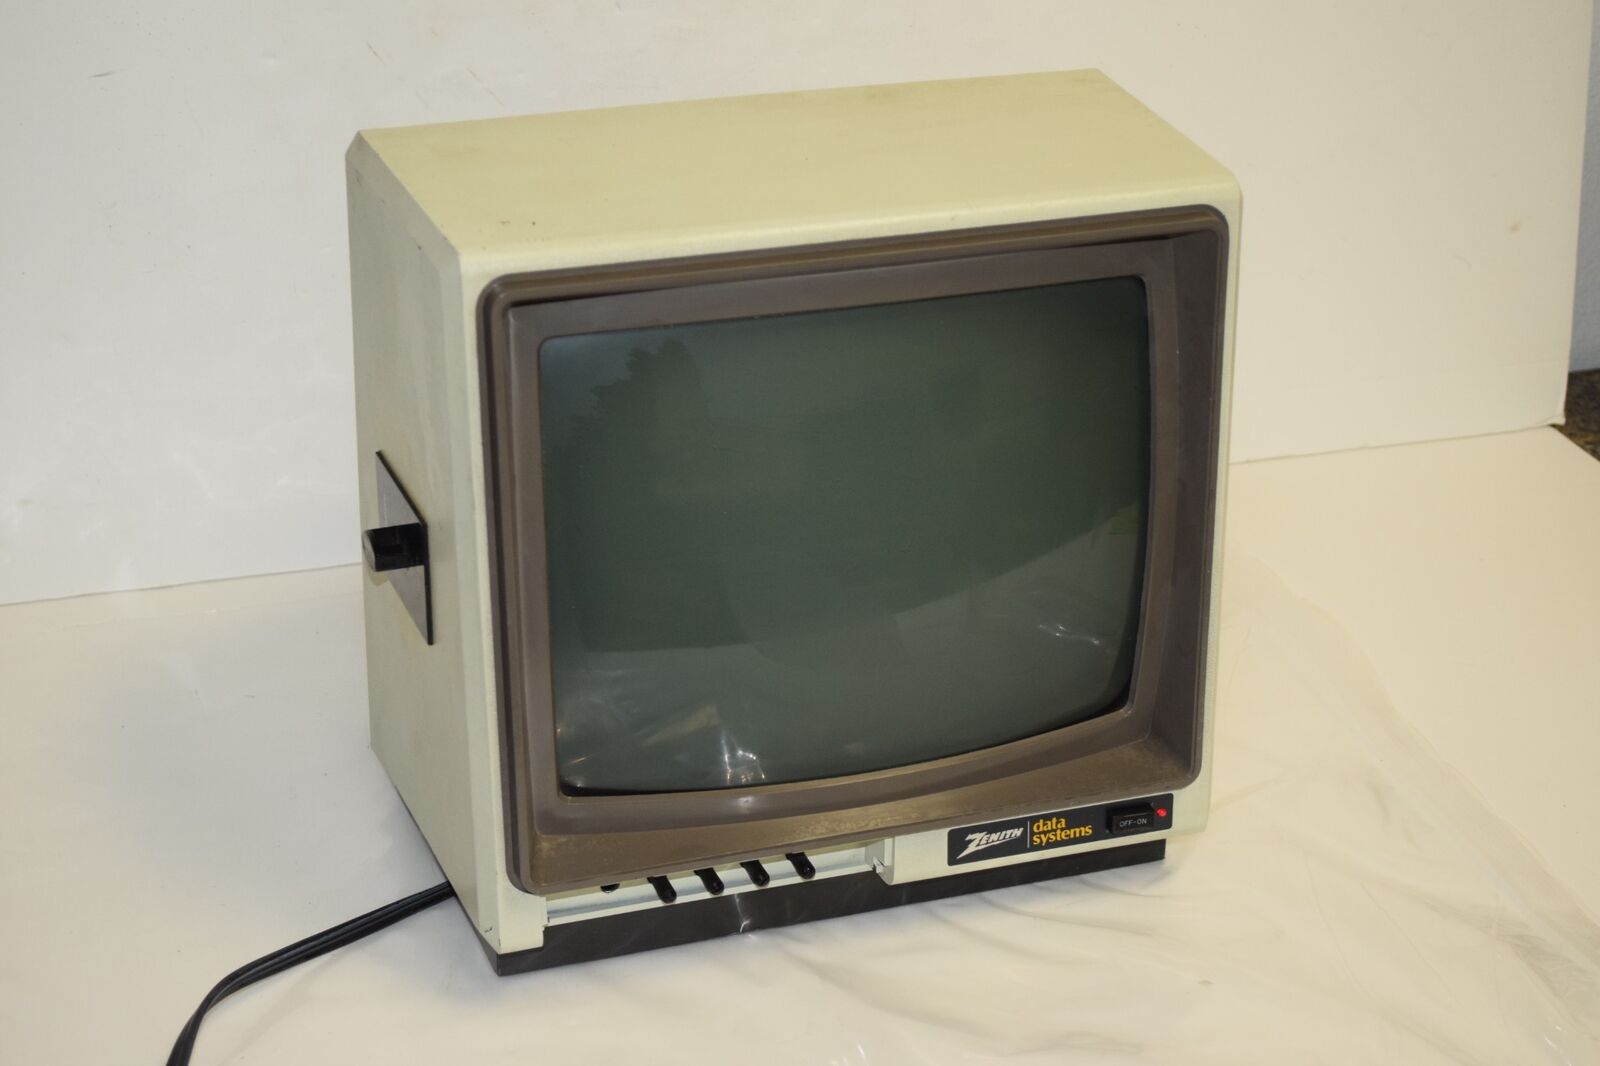 Zenith Data Systems Monitor ZVM-123-A Vintage 1984 Computer Monitor  (XHE16)